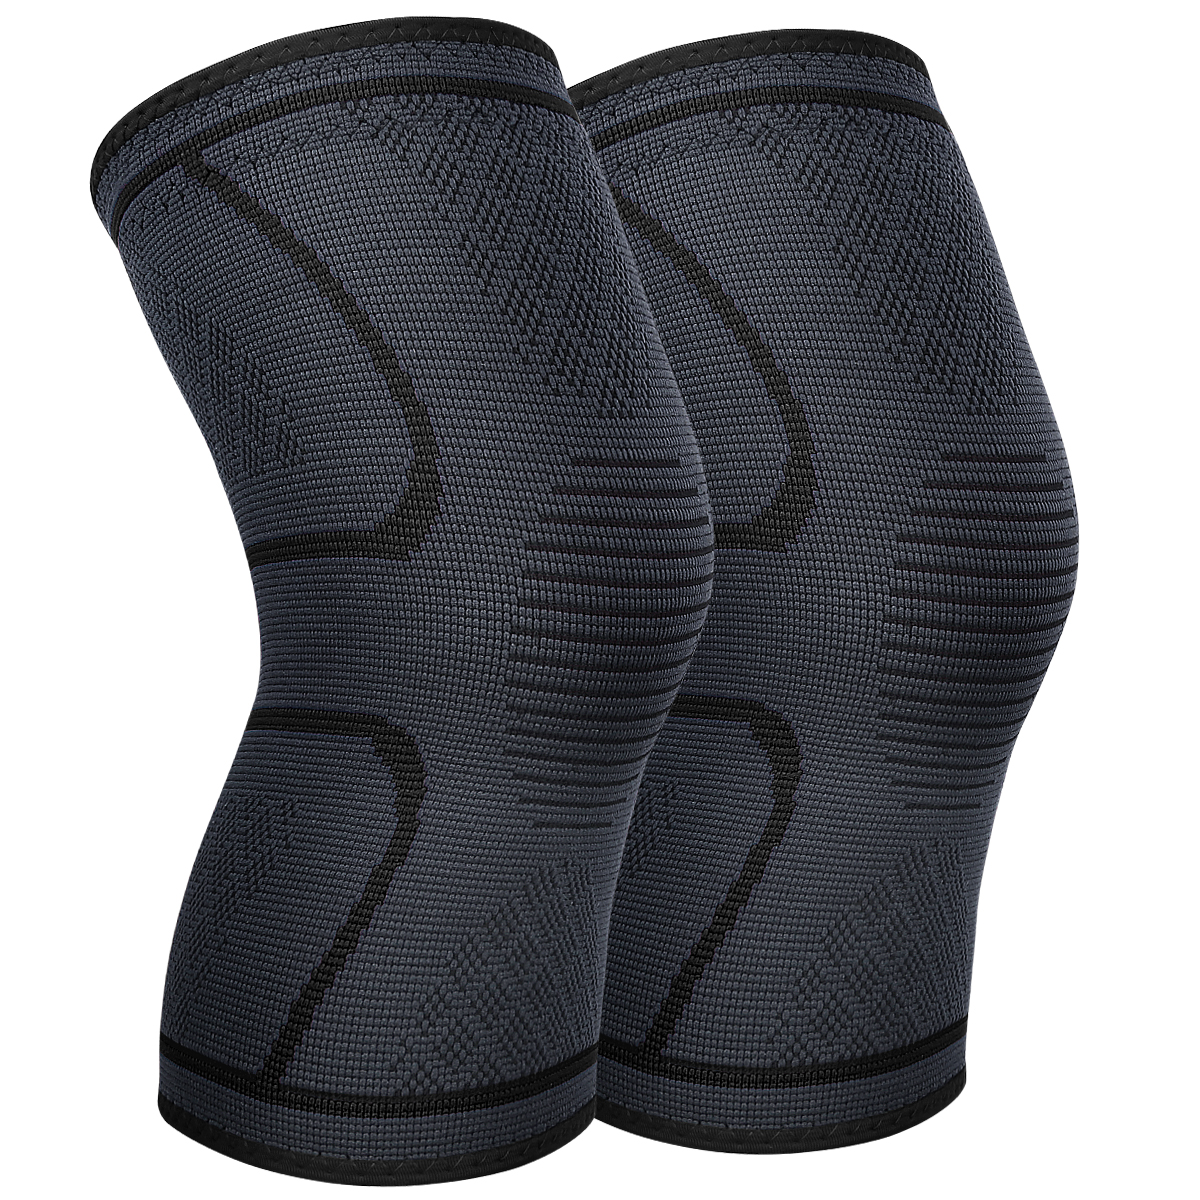 Knee Brace Support Pair for Men Women, AVIDDA Compression Knee Sleeve for Joint Pain Relief, Arthritis, Meniscus Tear, Injury Recovery, Running, Squats, Weight Lifting, Football Gray M